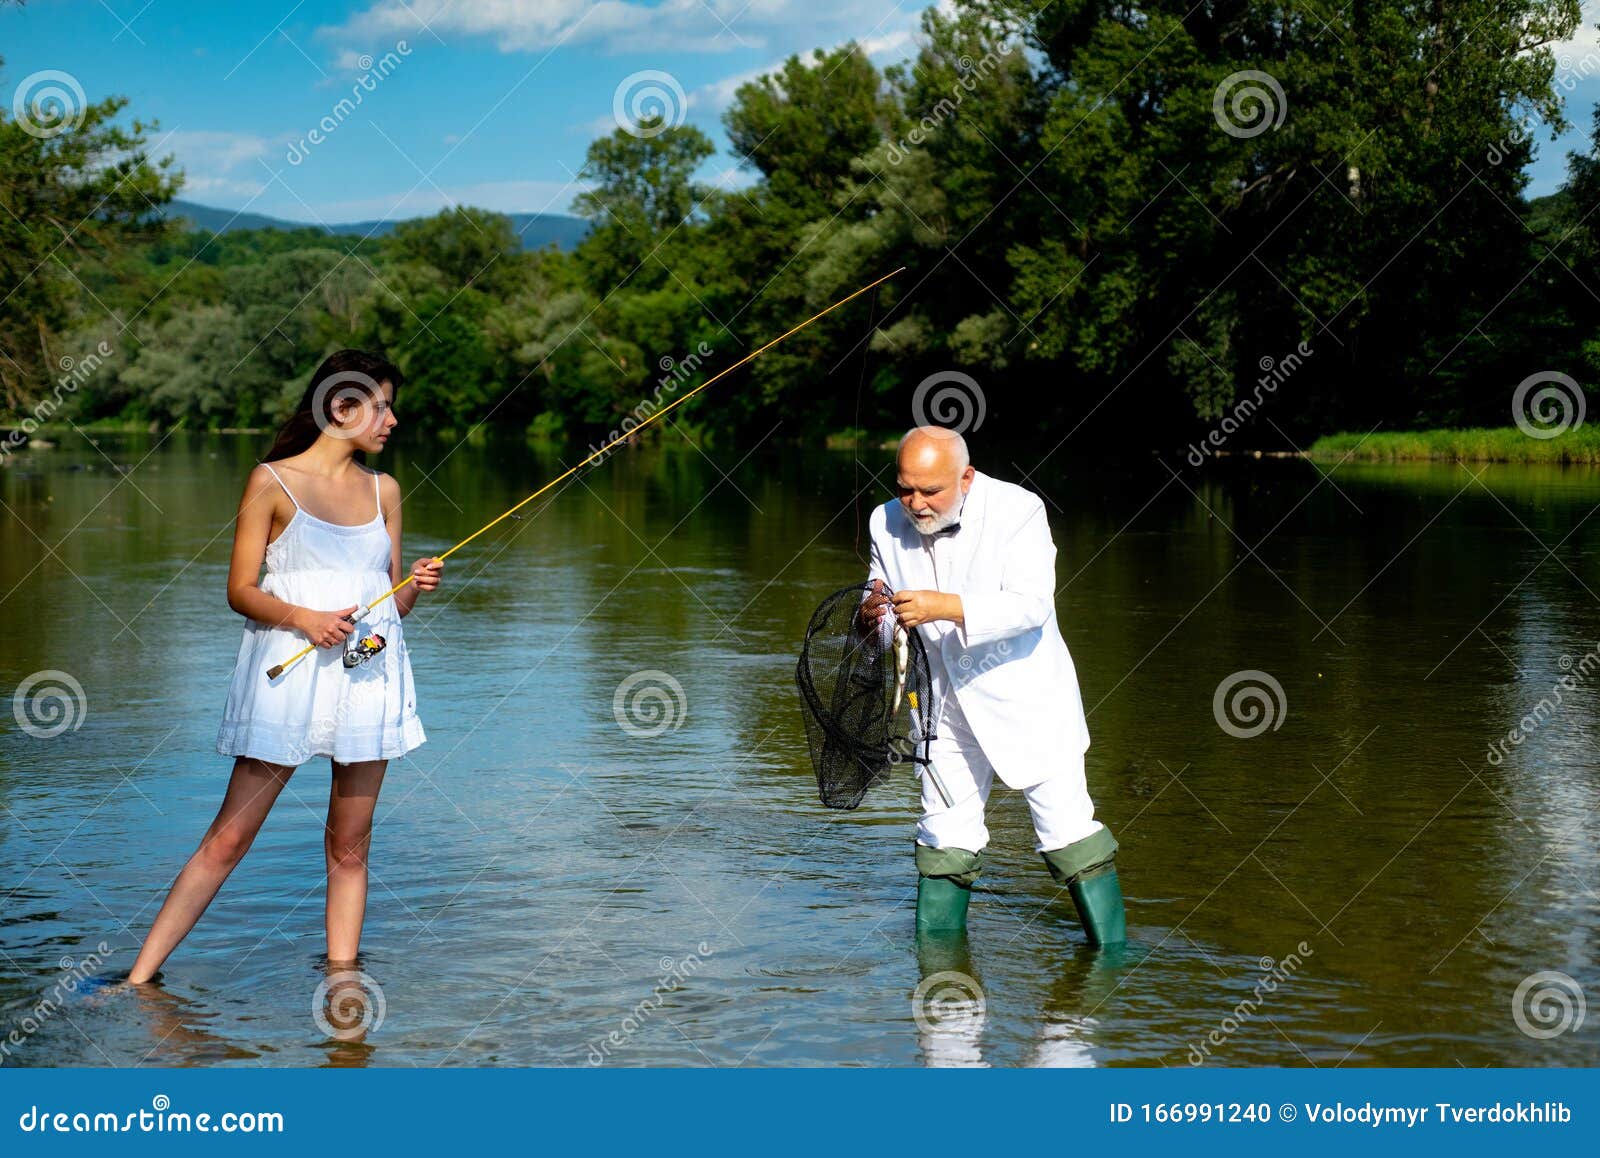 Handsome Mature Man Fishing with Young Woman in White Dress. Man